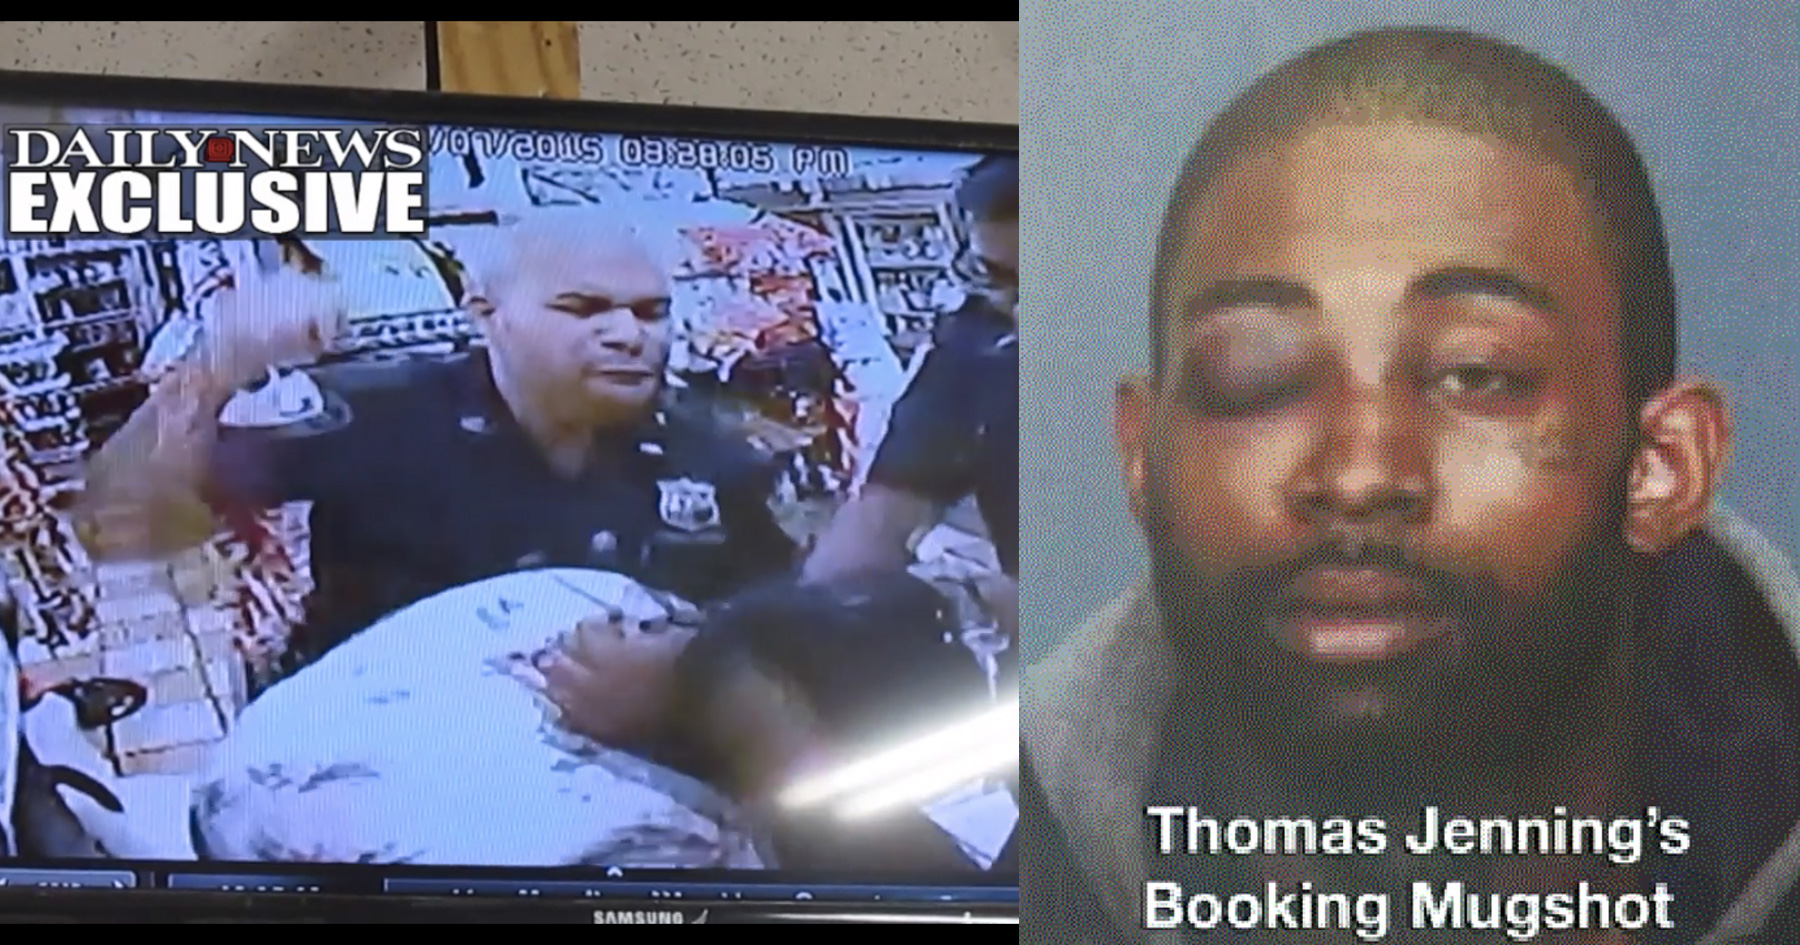 This Video Of An Unarmed Black Man Beaten By Nypd Officers Raises Questions Attn 